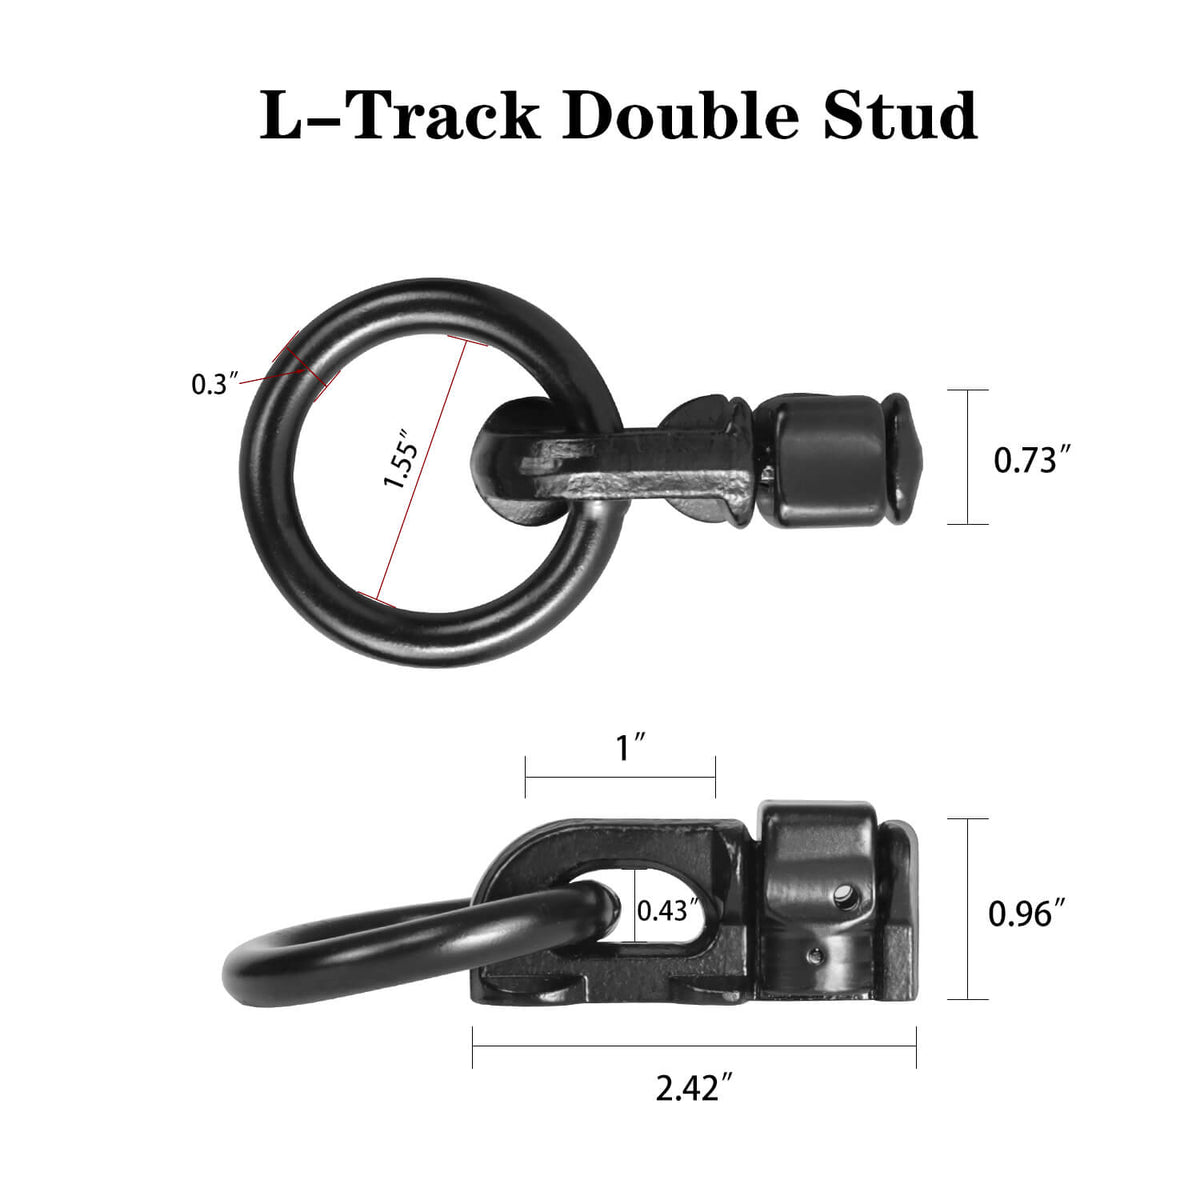 L-Track Double Stud Tie Down Fitting with O Ring